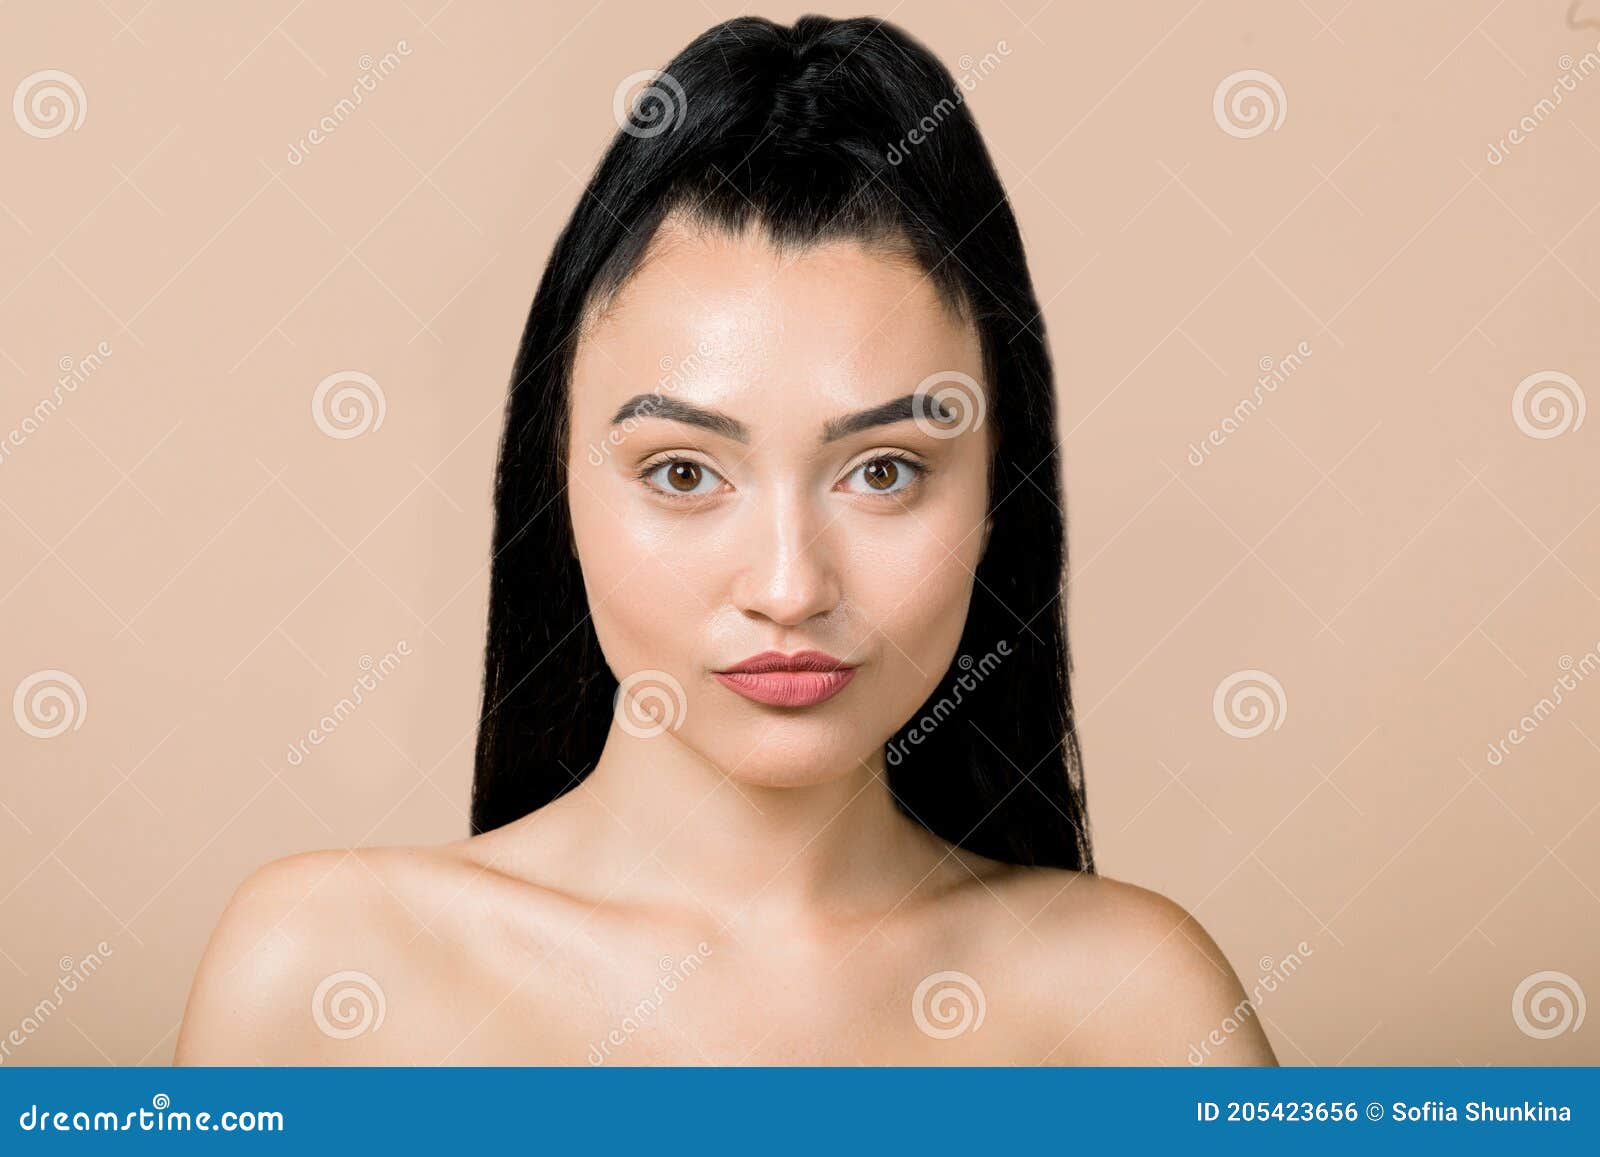 Portrait Of Beautiful Young Asian Woman With A Black Healthy Hair In